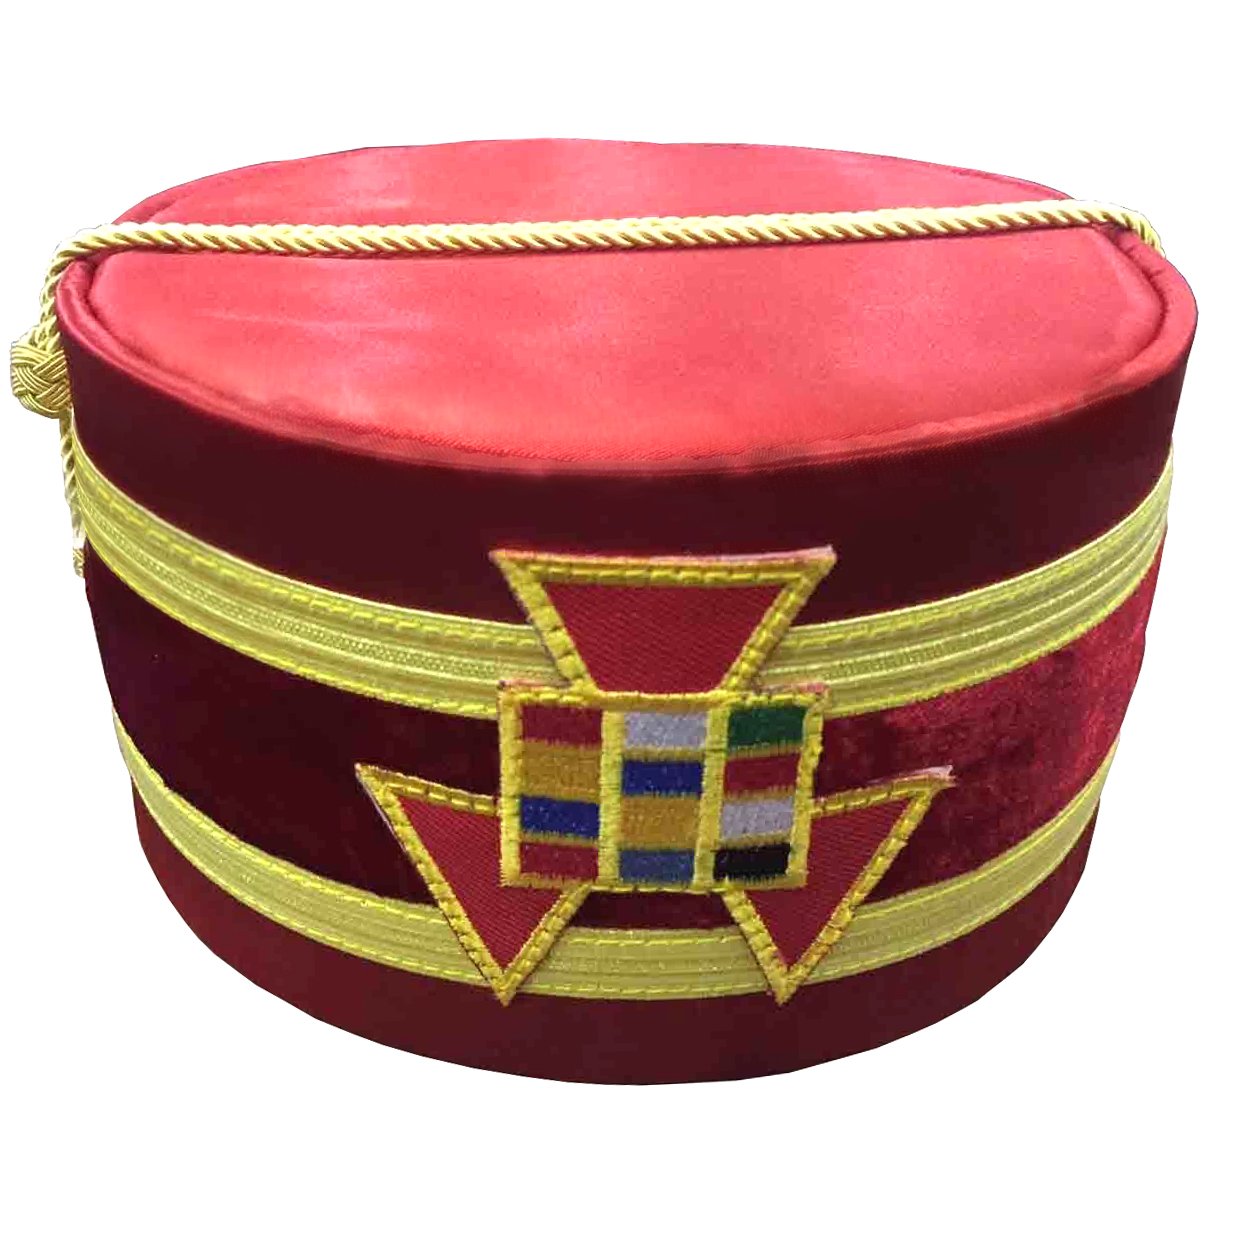 Past High Priest Royal Arch Chapter Crown Cap - Red Emblem with Gold Braid - Bricks Masons